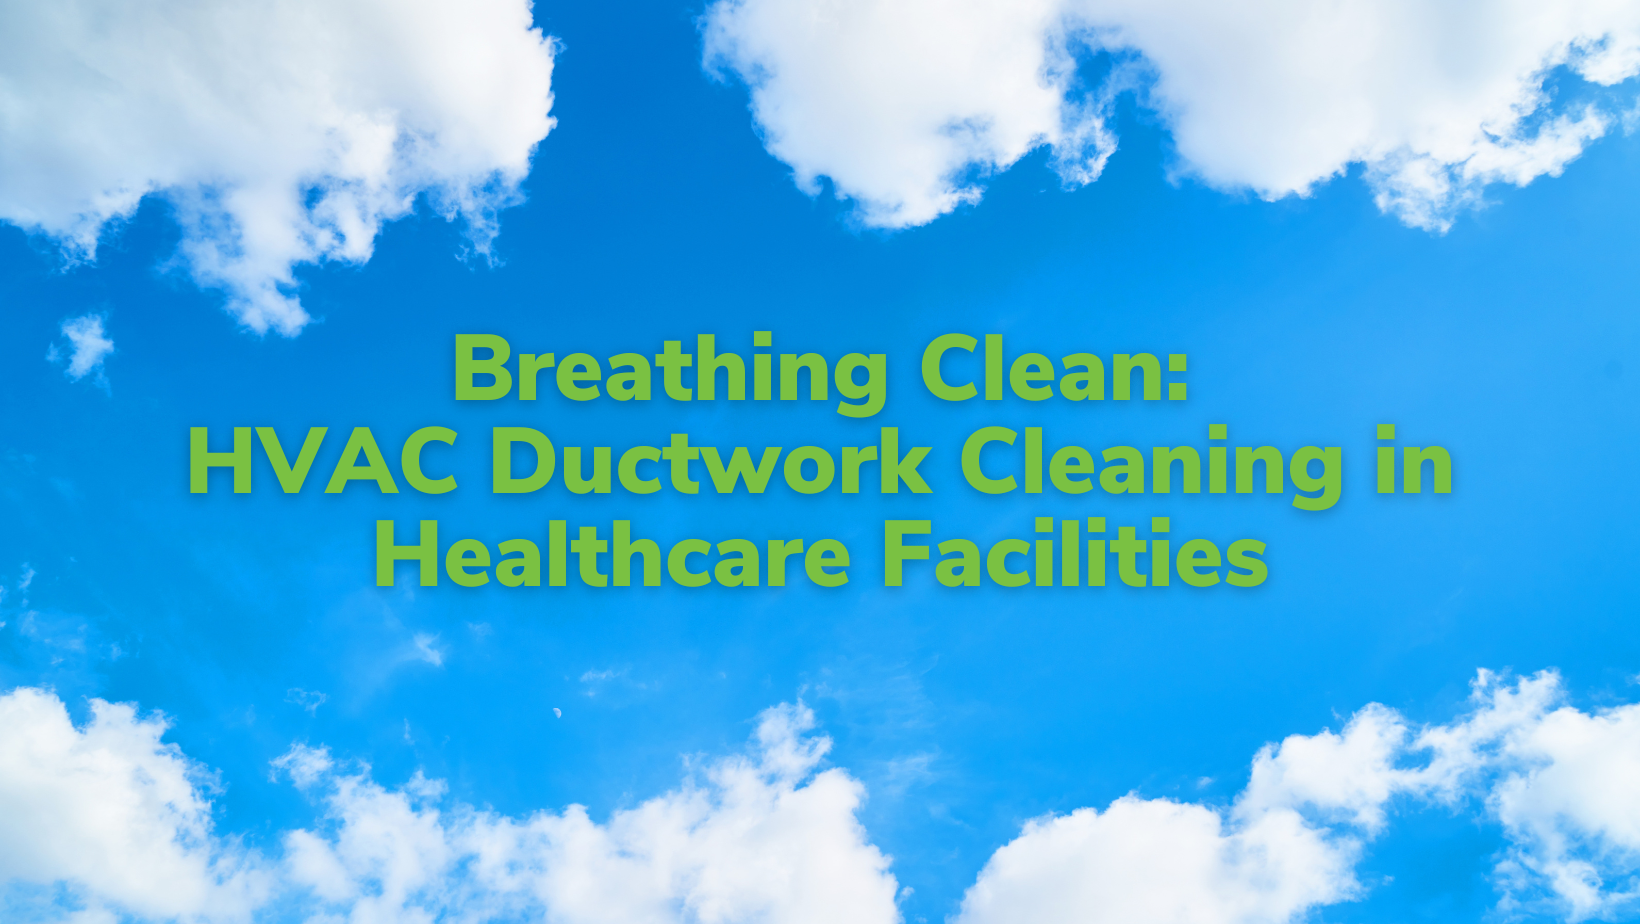 HVAC Ductwork Cleaning Feb24